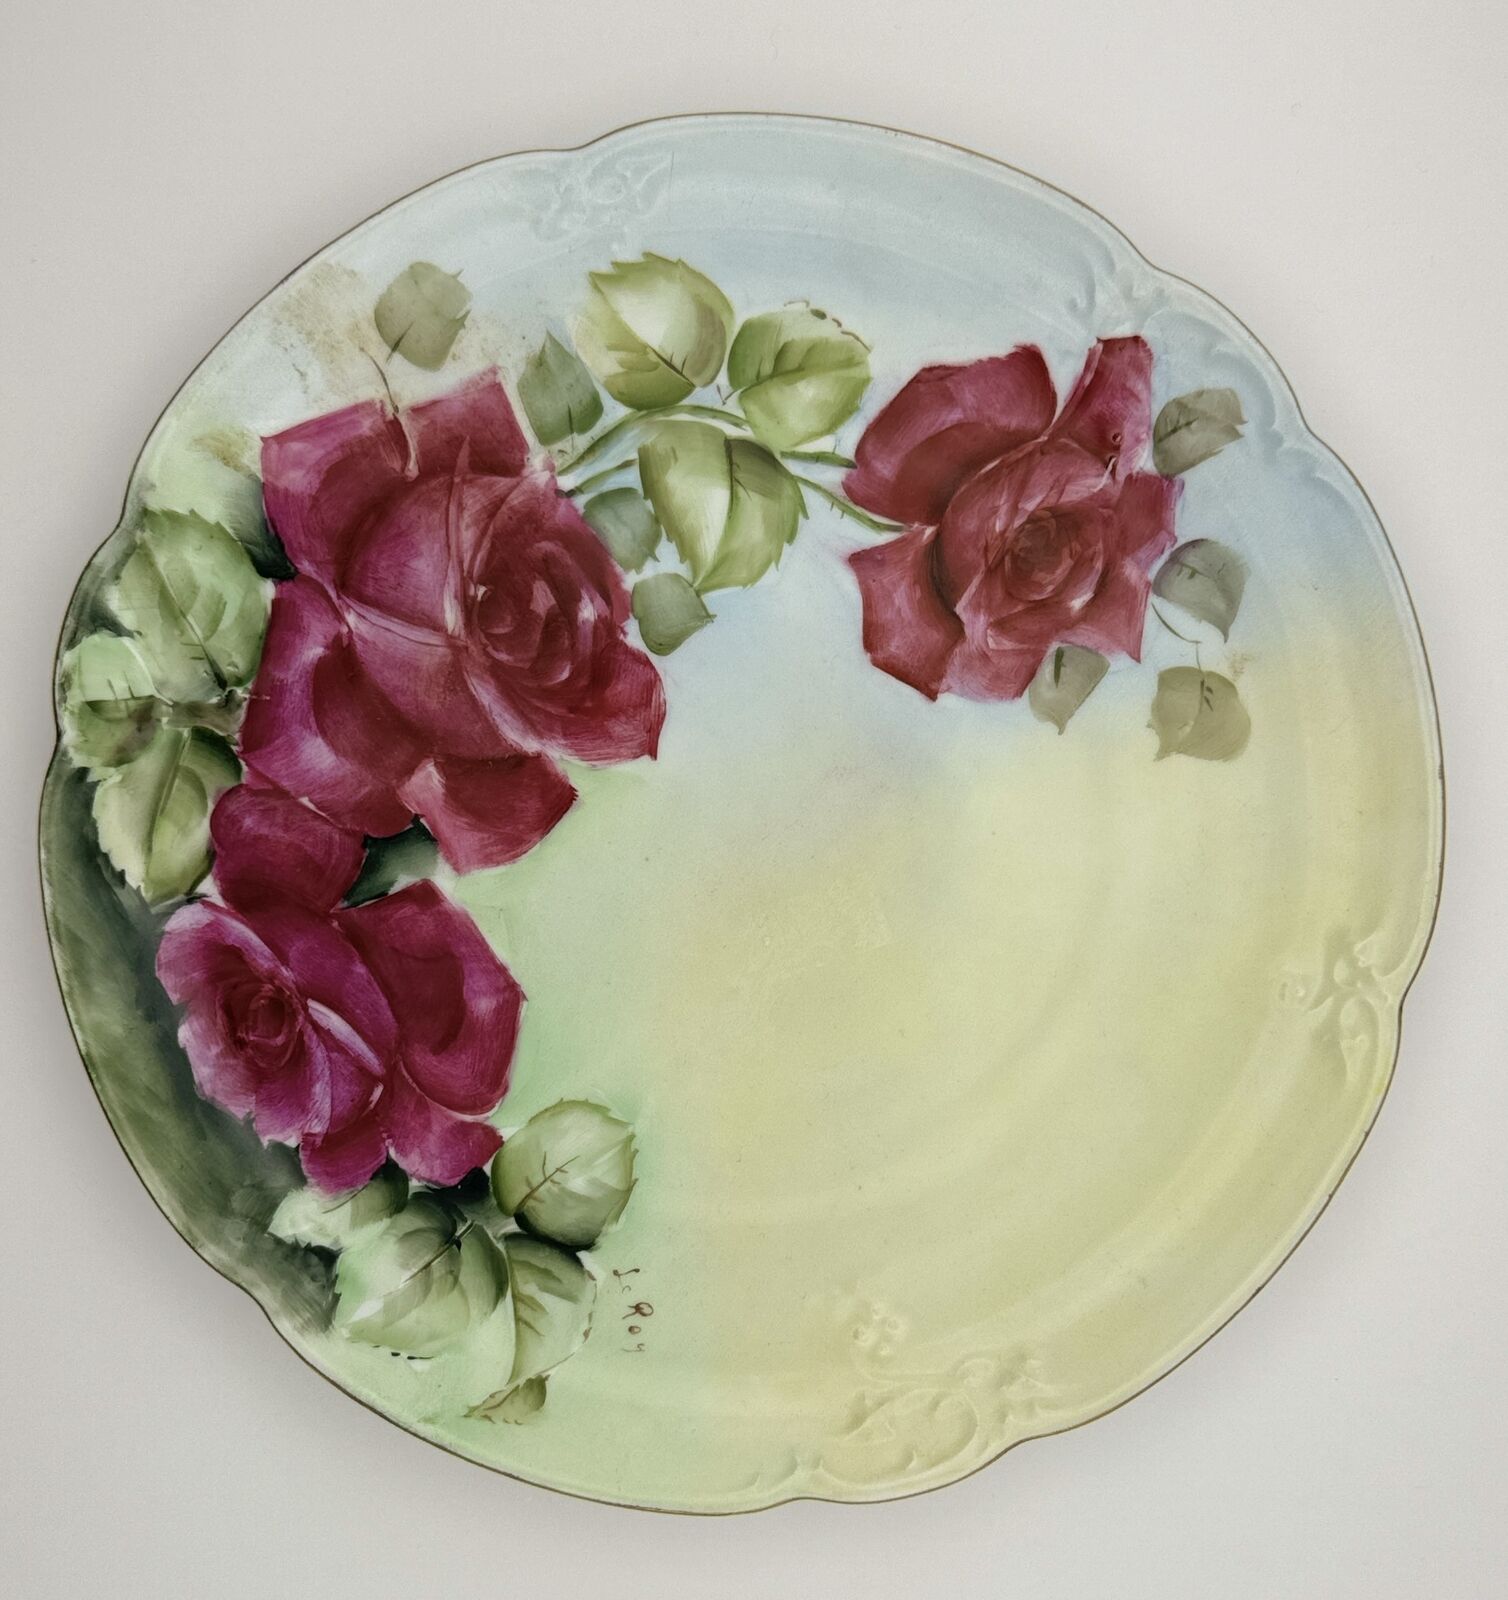 Rare Haviland D'Arcy's Hand-Painted Plate by LeRoy with Red Roses Design